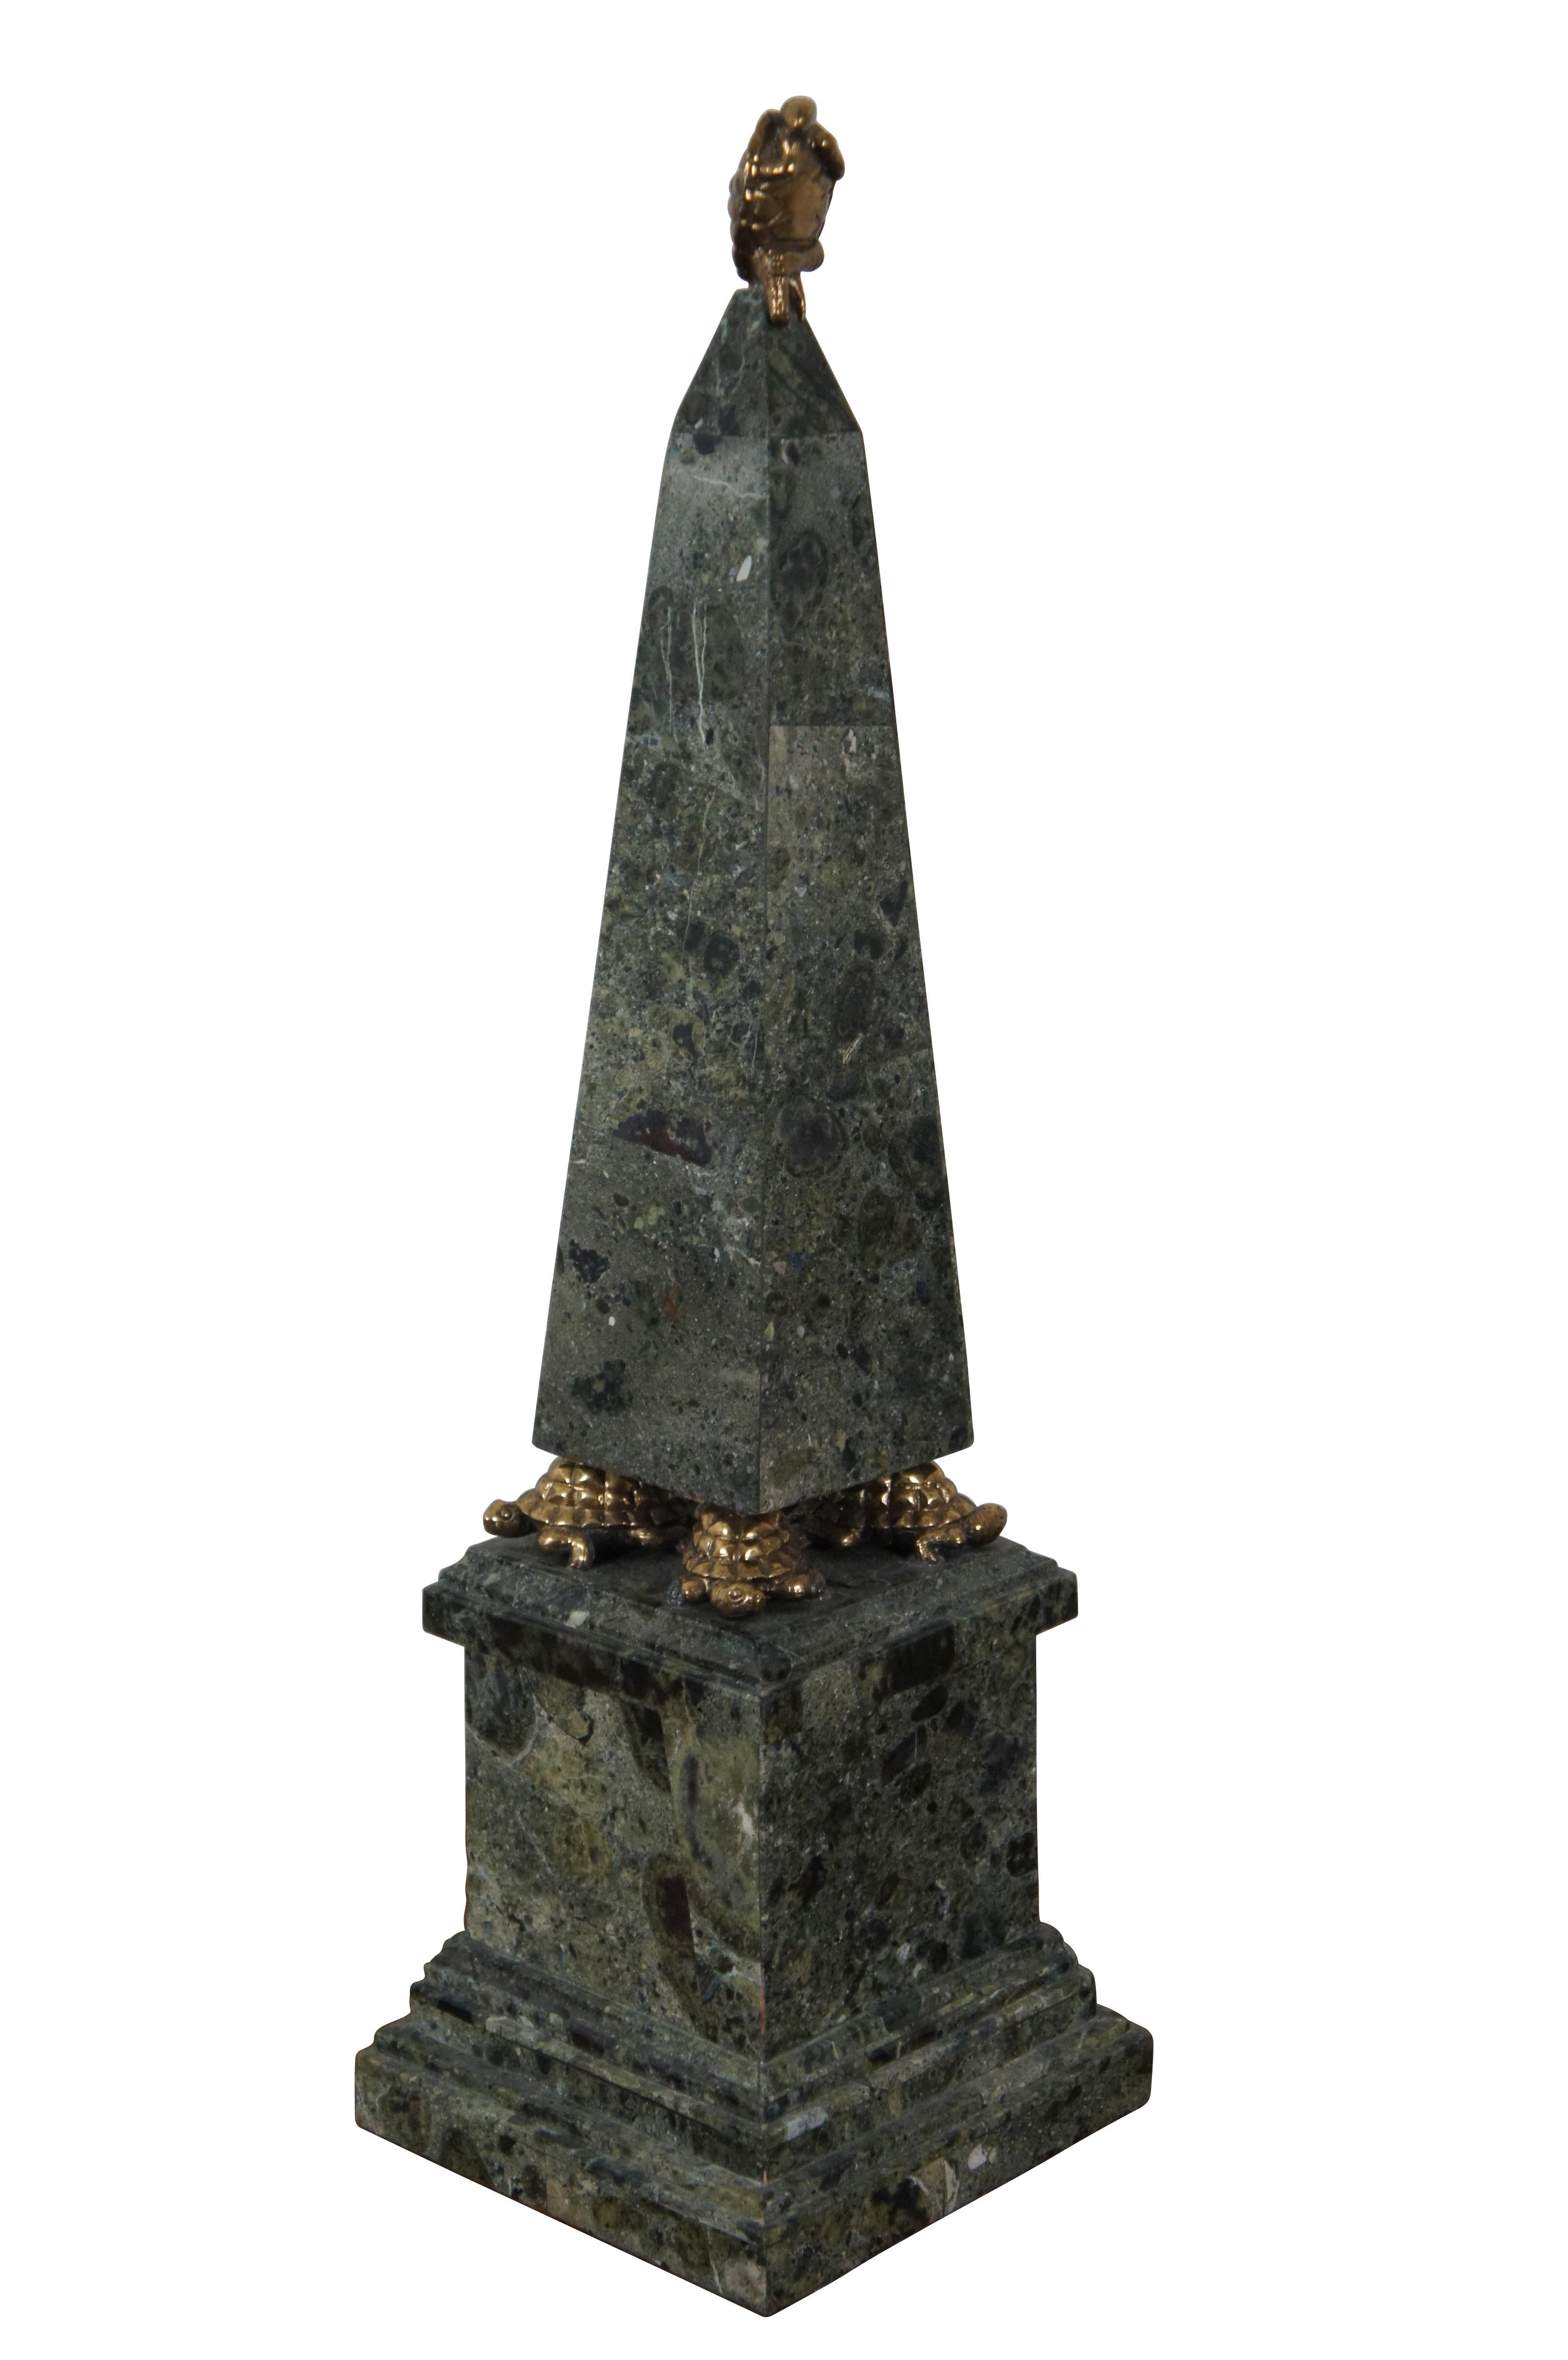 Vintage Maitland Smith stone tesslated marble stone obelisk sculpture standing on the backs of four brass turtles, which in turn sit atop a square pedestal.  At the tip of the obelisk sits another brass turtle, anthropomorphized in the position of